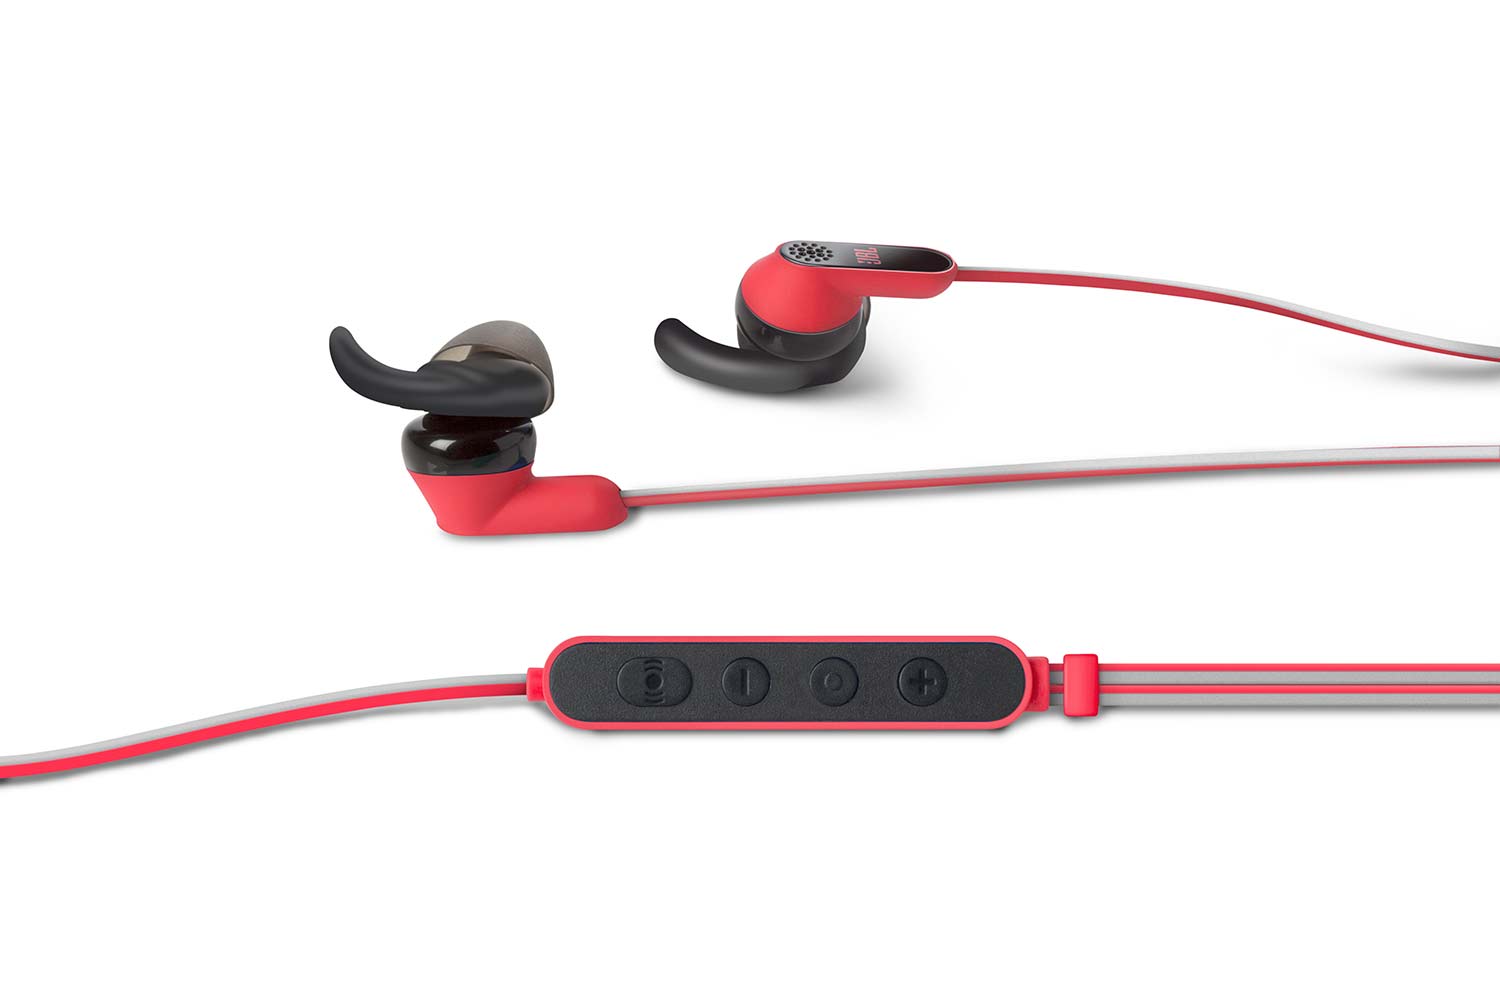 jbl new headphones ifa everest reflect grip noise cancelling bluetooth large mini bt red 0971 hero